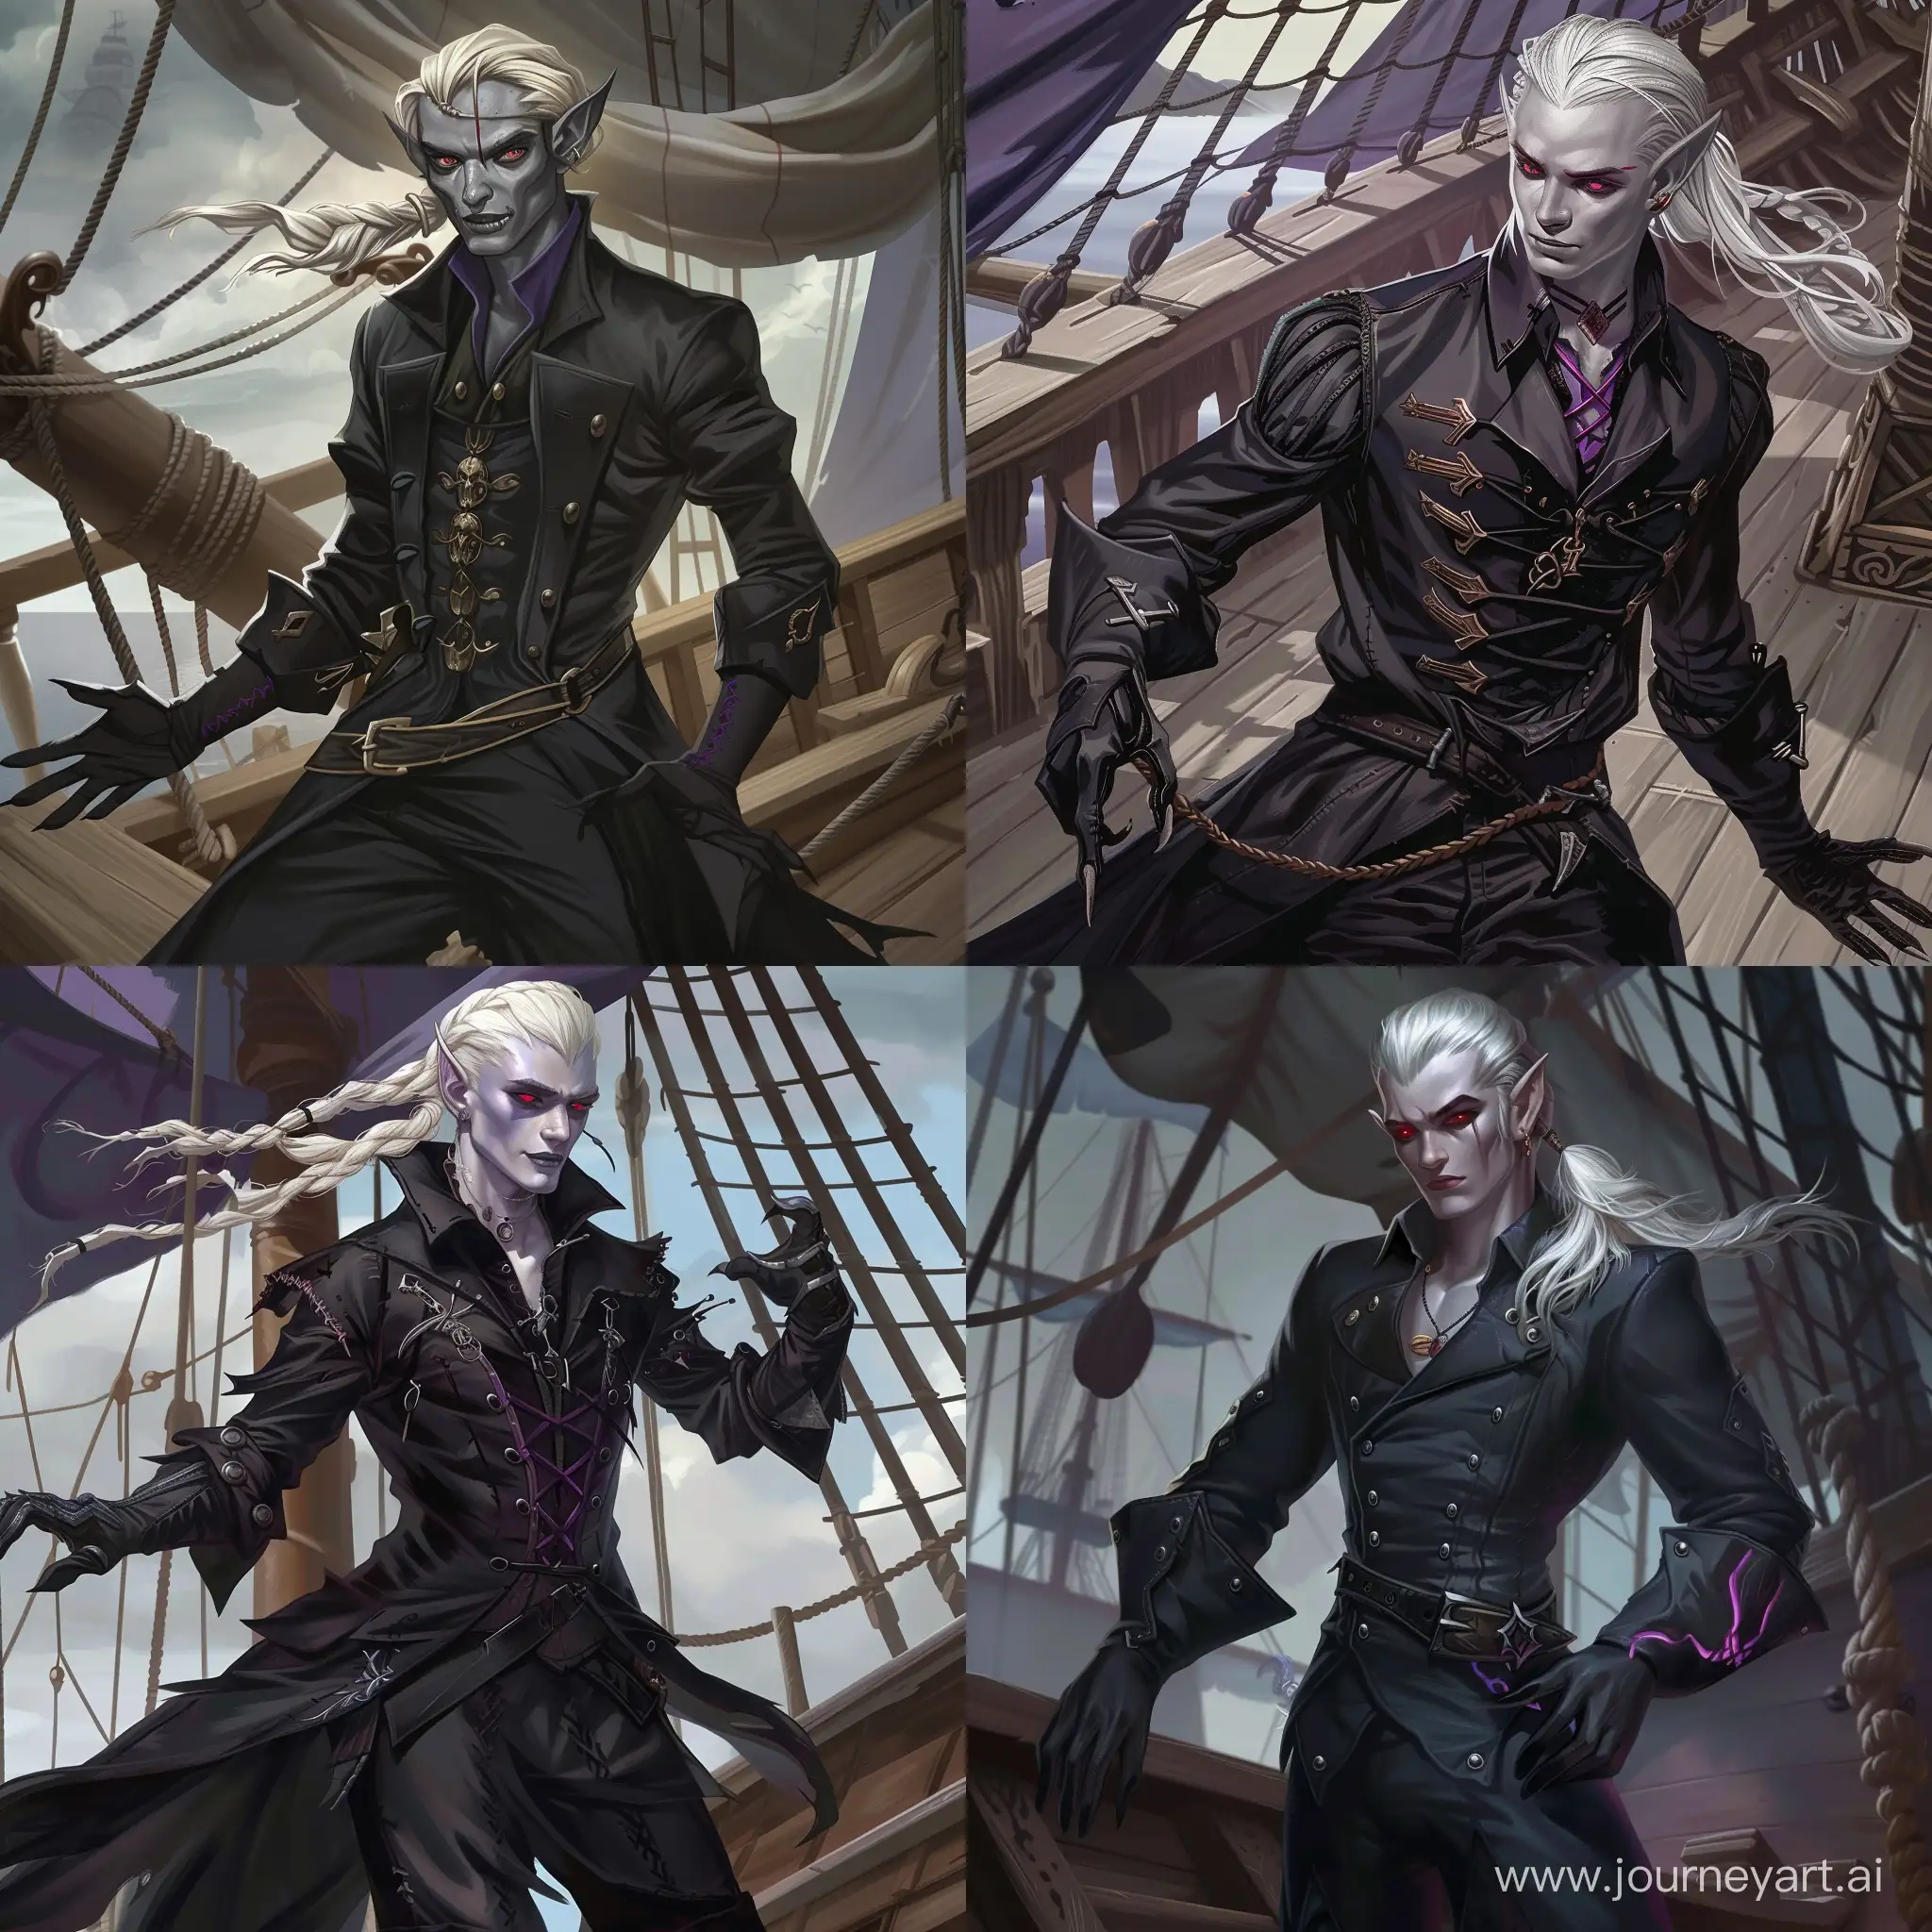 Handsome-Drow-Pirate-on-Pirate-Ship-with-Red-Eyes-and-Black-Claws